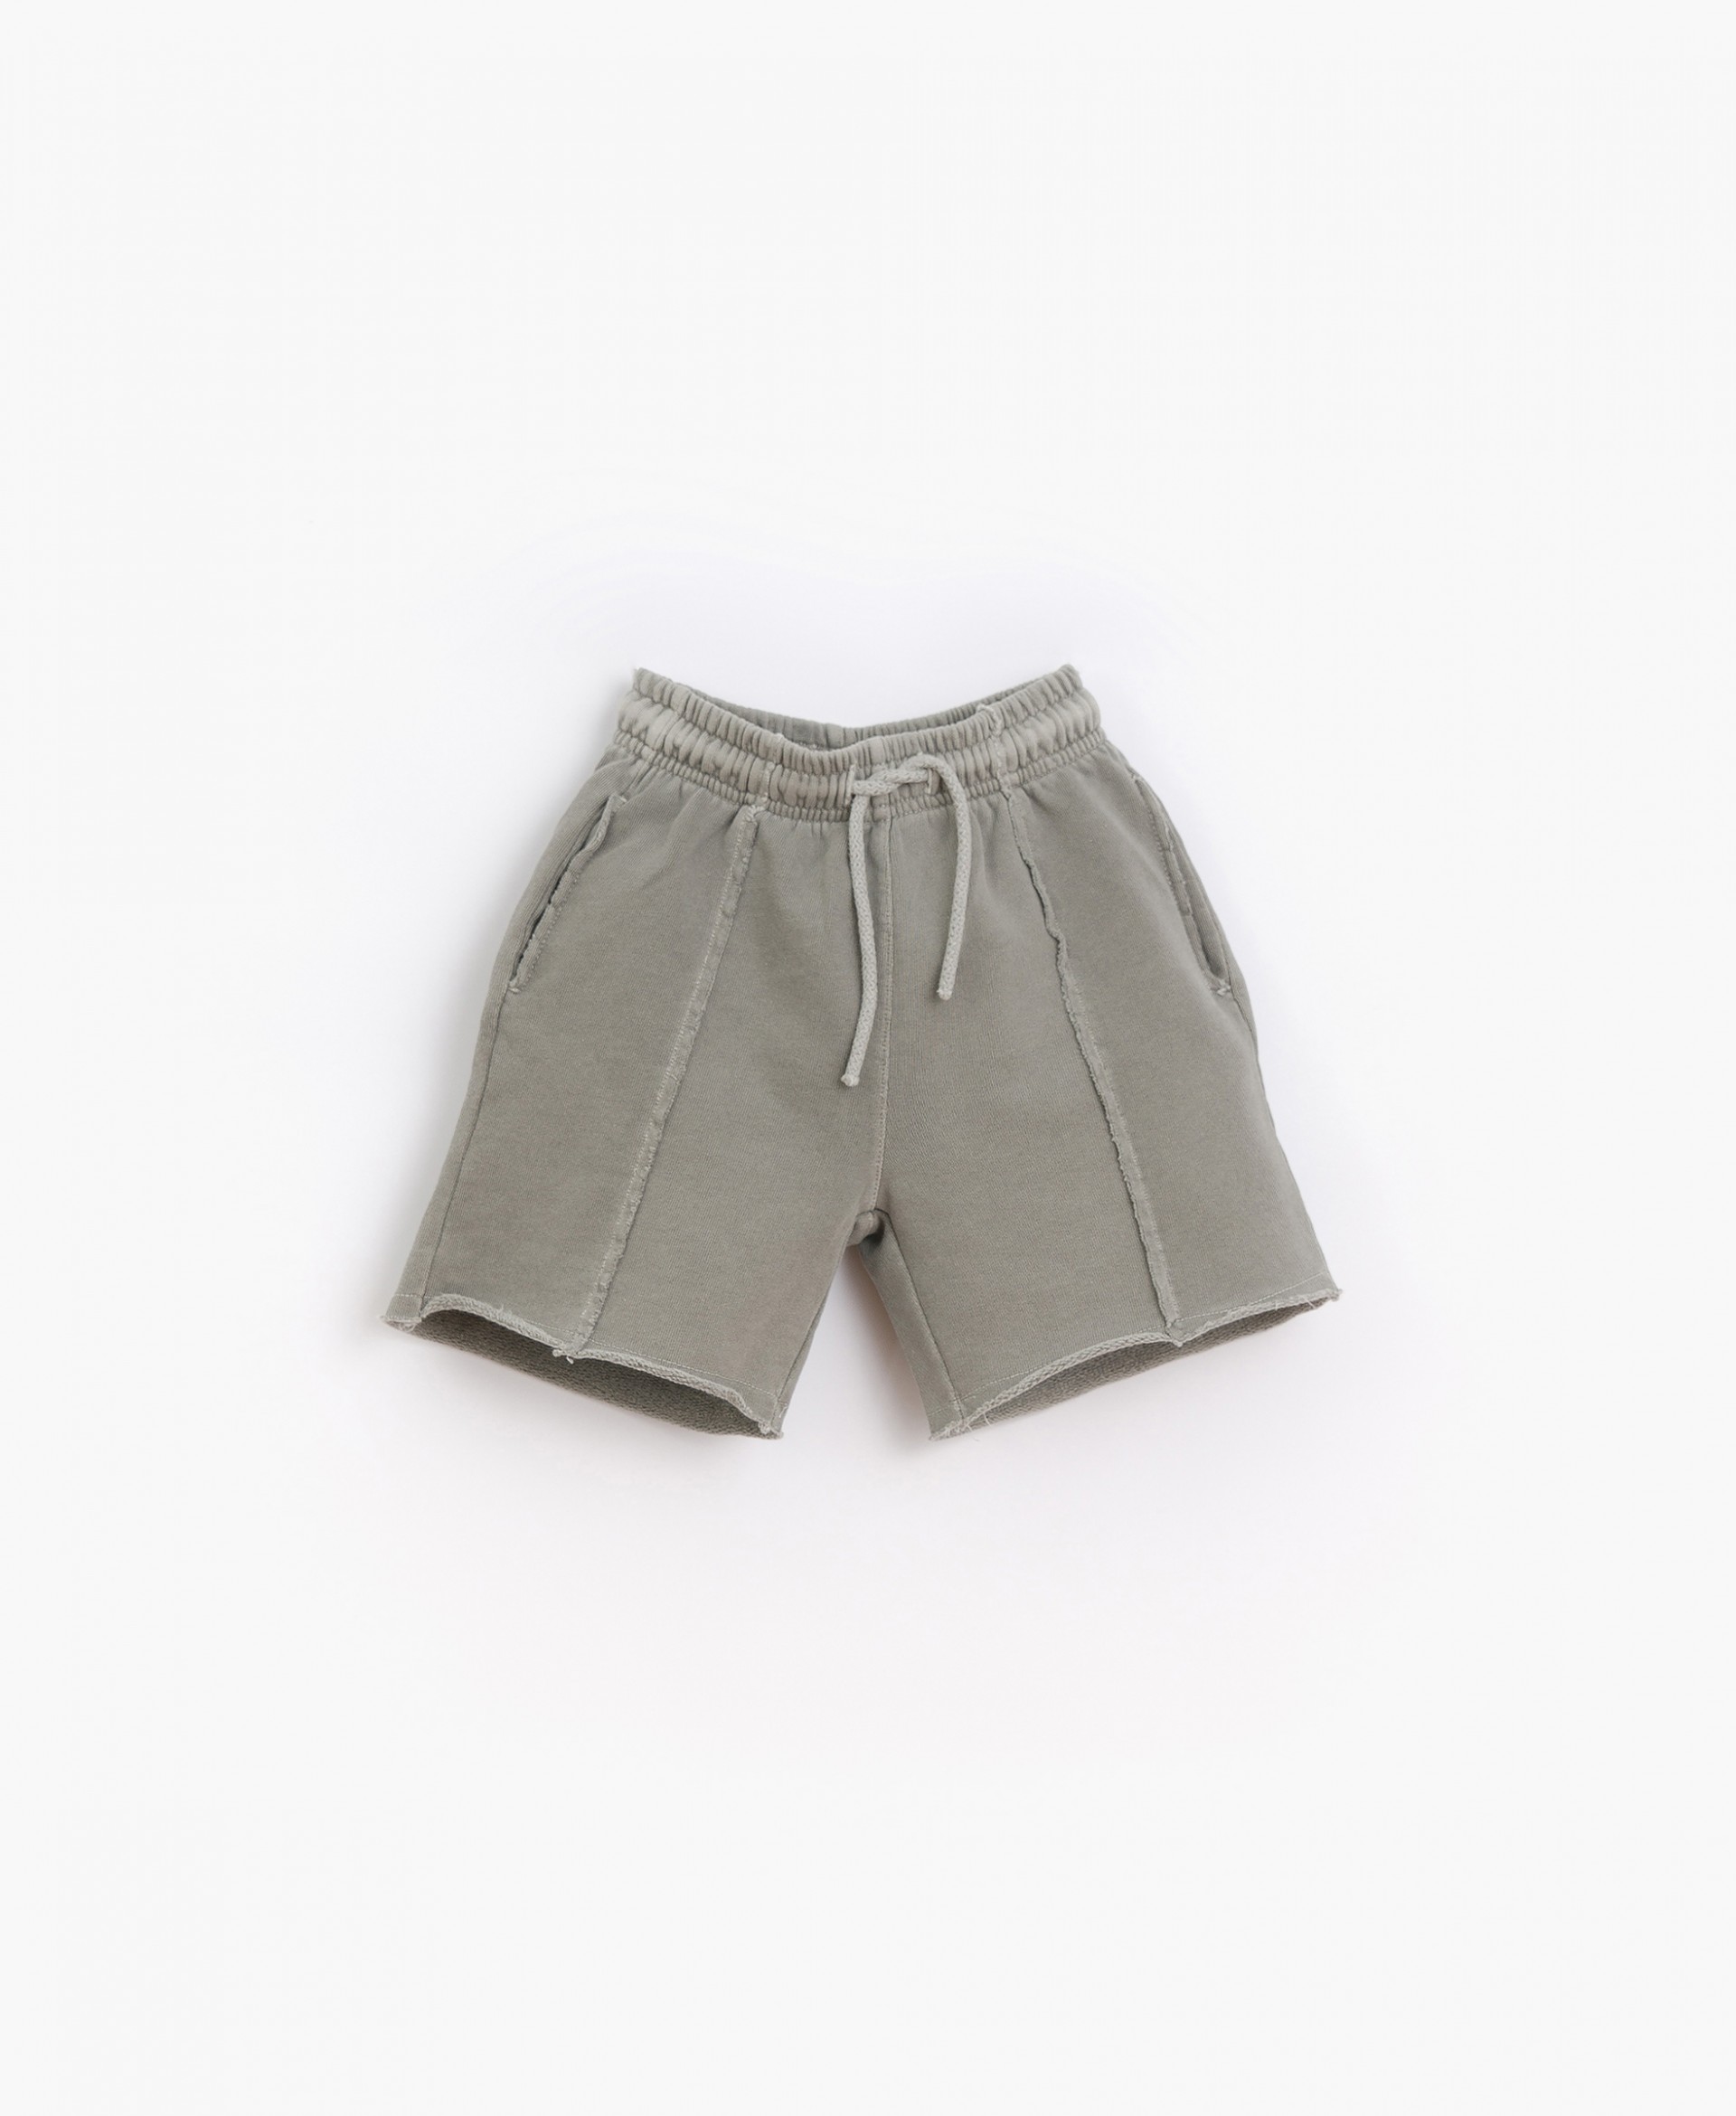 Shorts in blend of organic cotton and cotton | Basketry